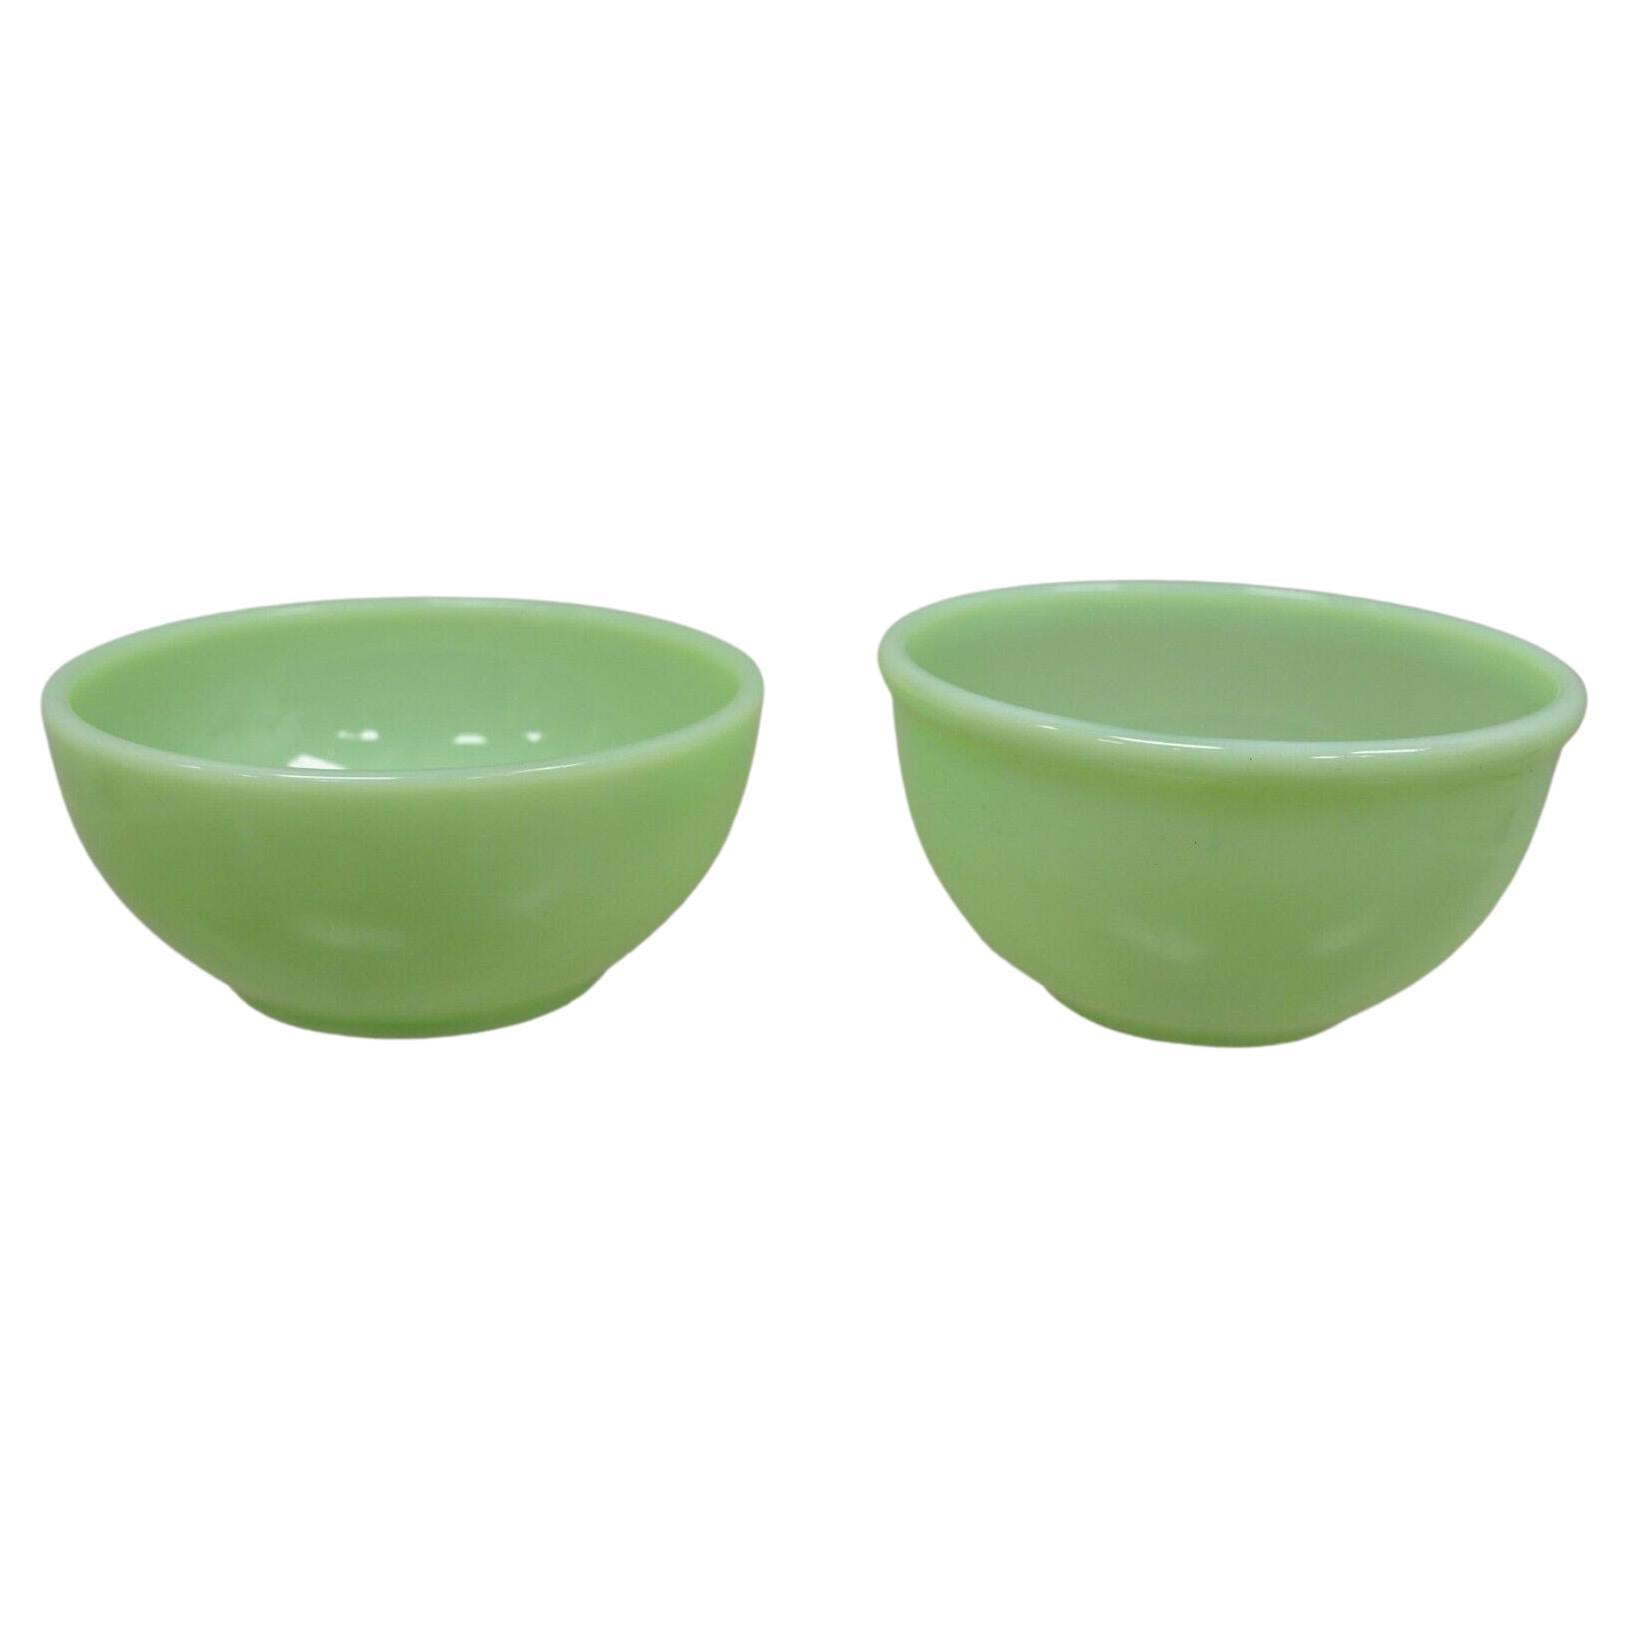 Vtg Fire King Jadeite Green 13 Oven Ware Round Cereal Chili Soup Bowl, 2 Pcs